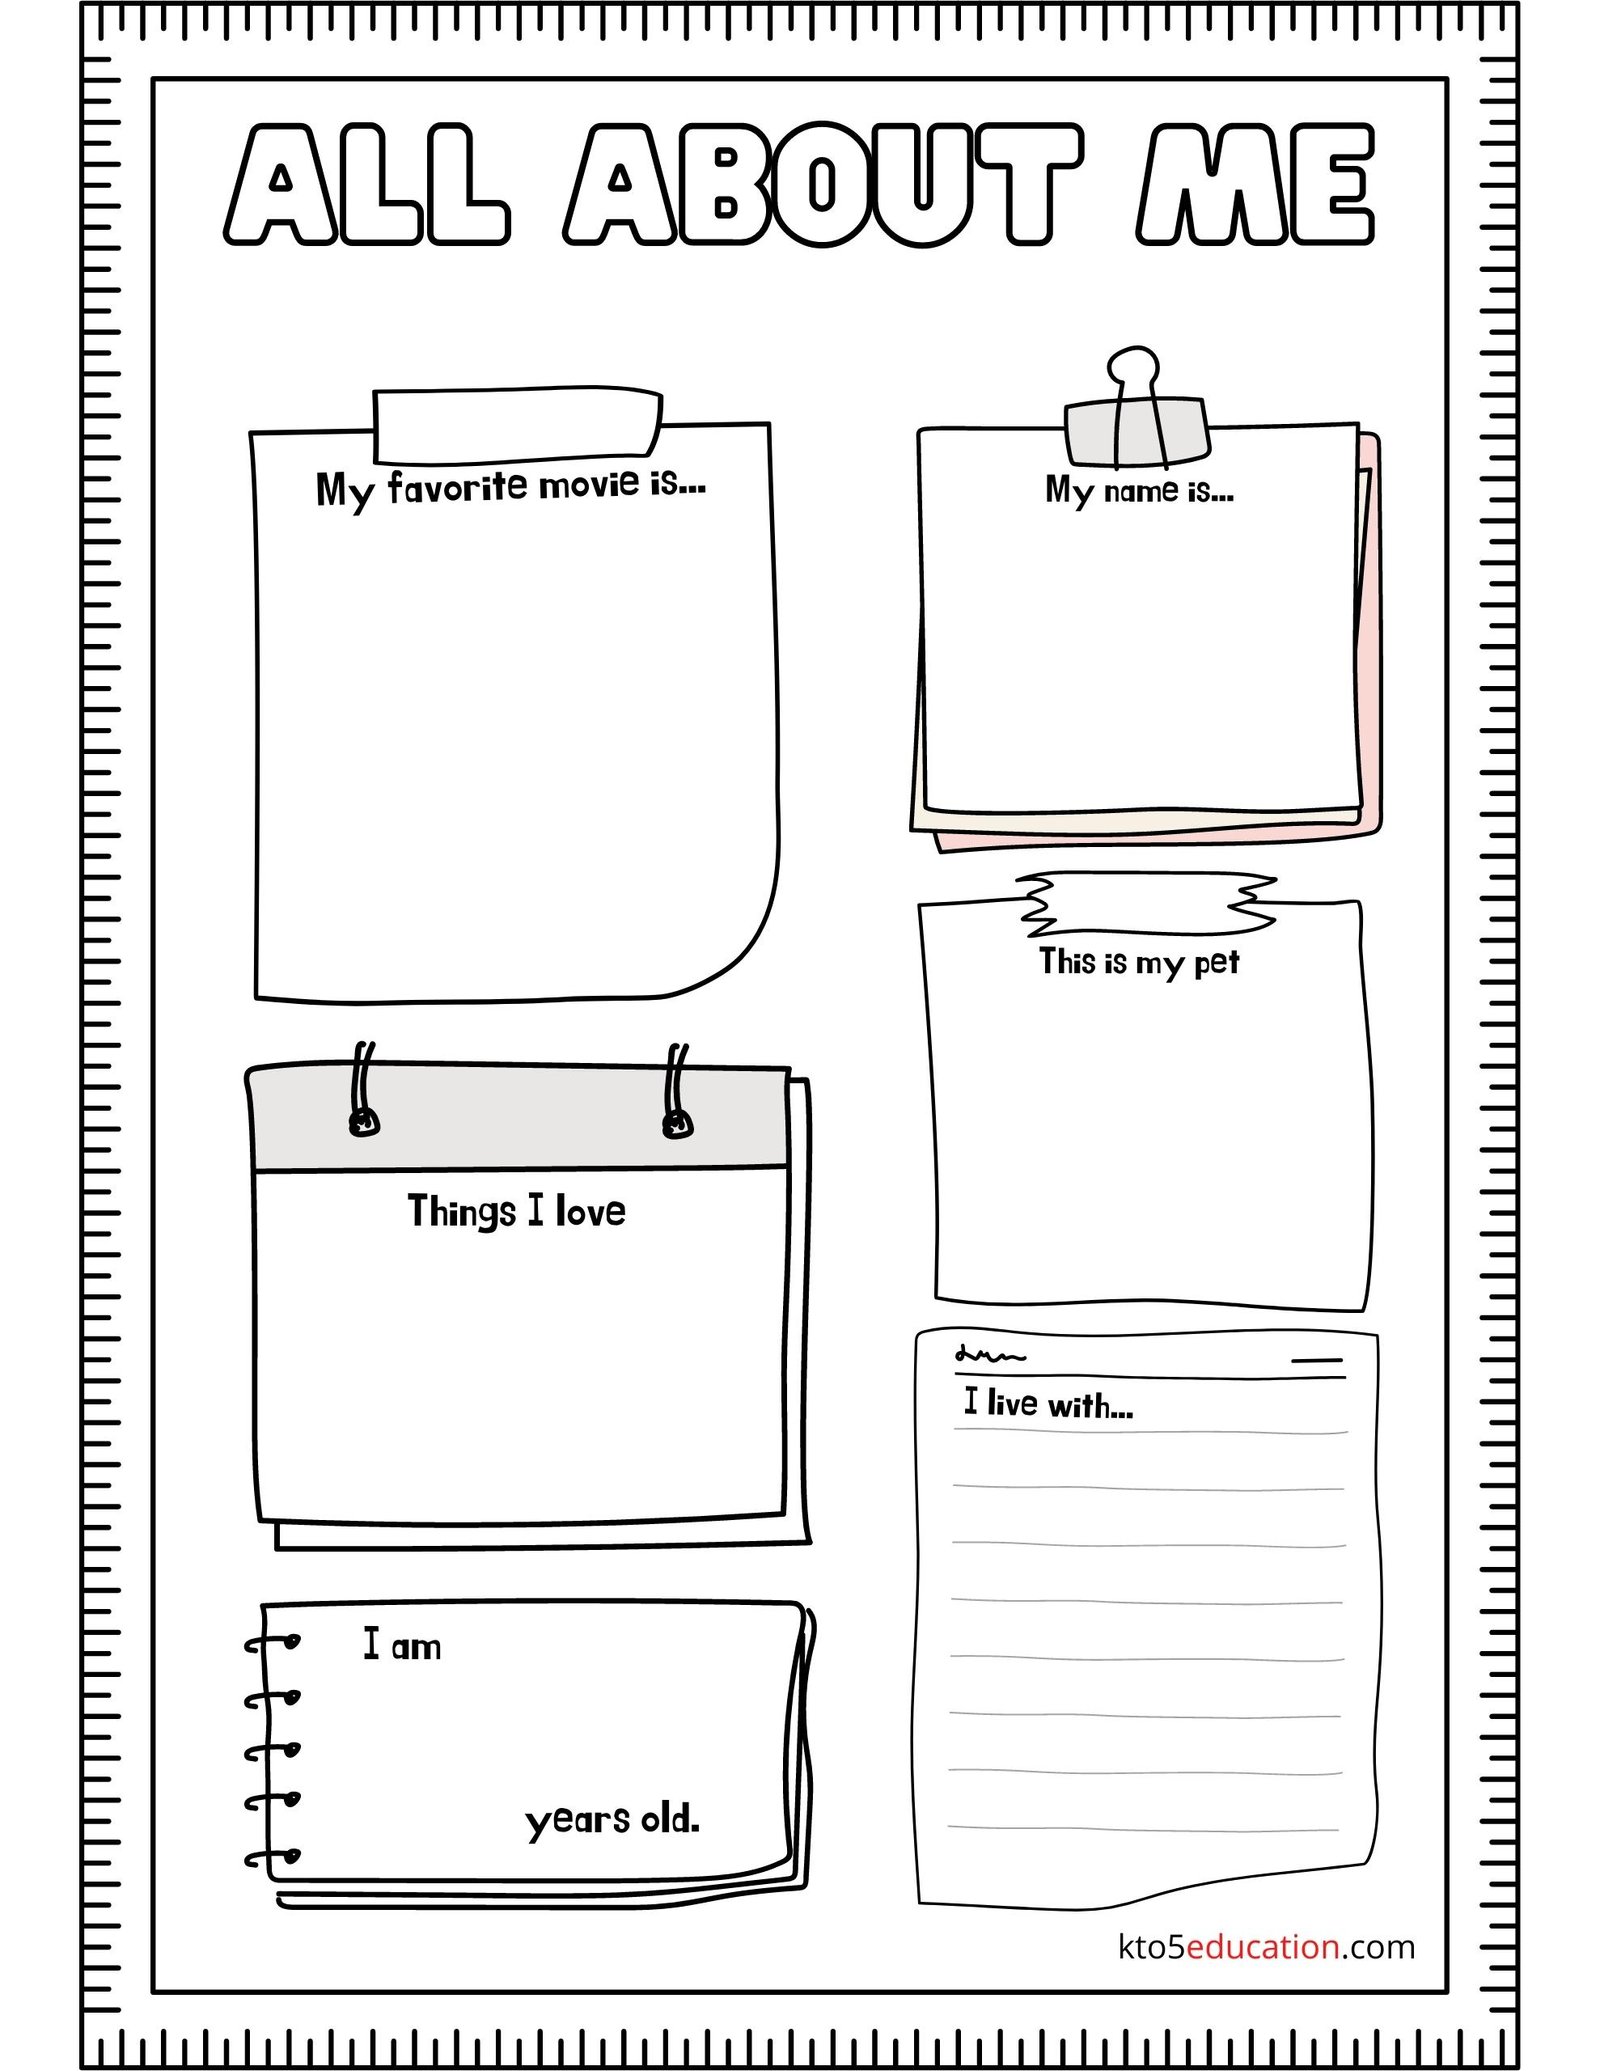 All About Me Kids Worksheets